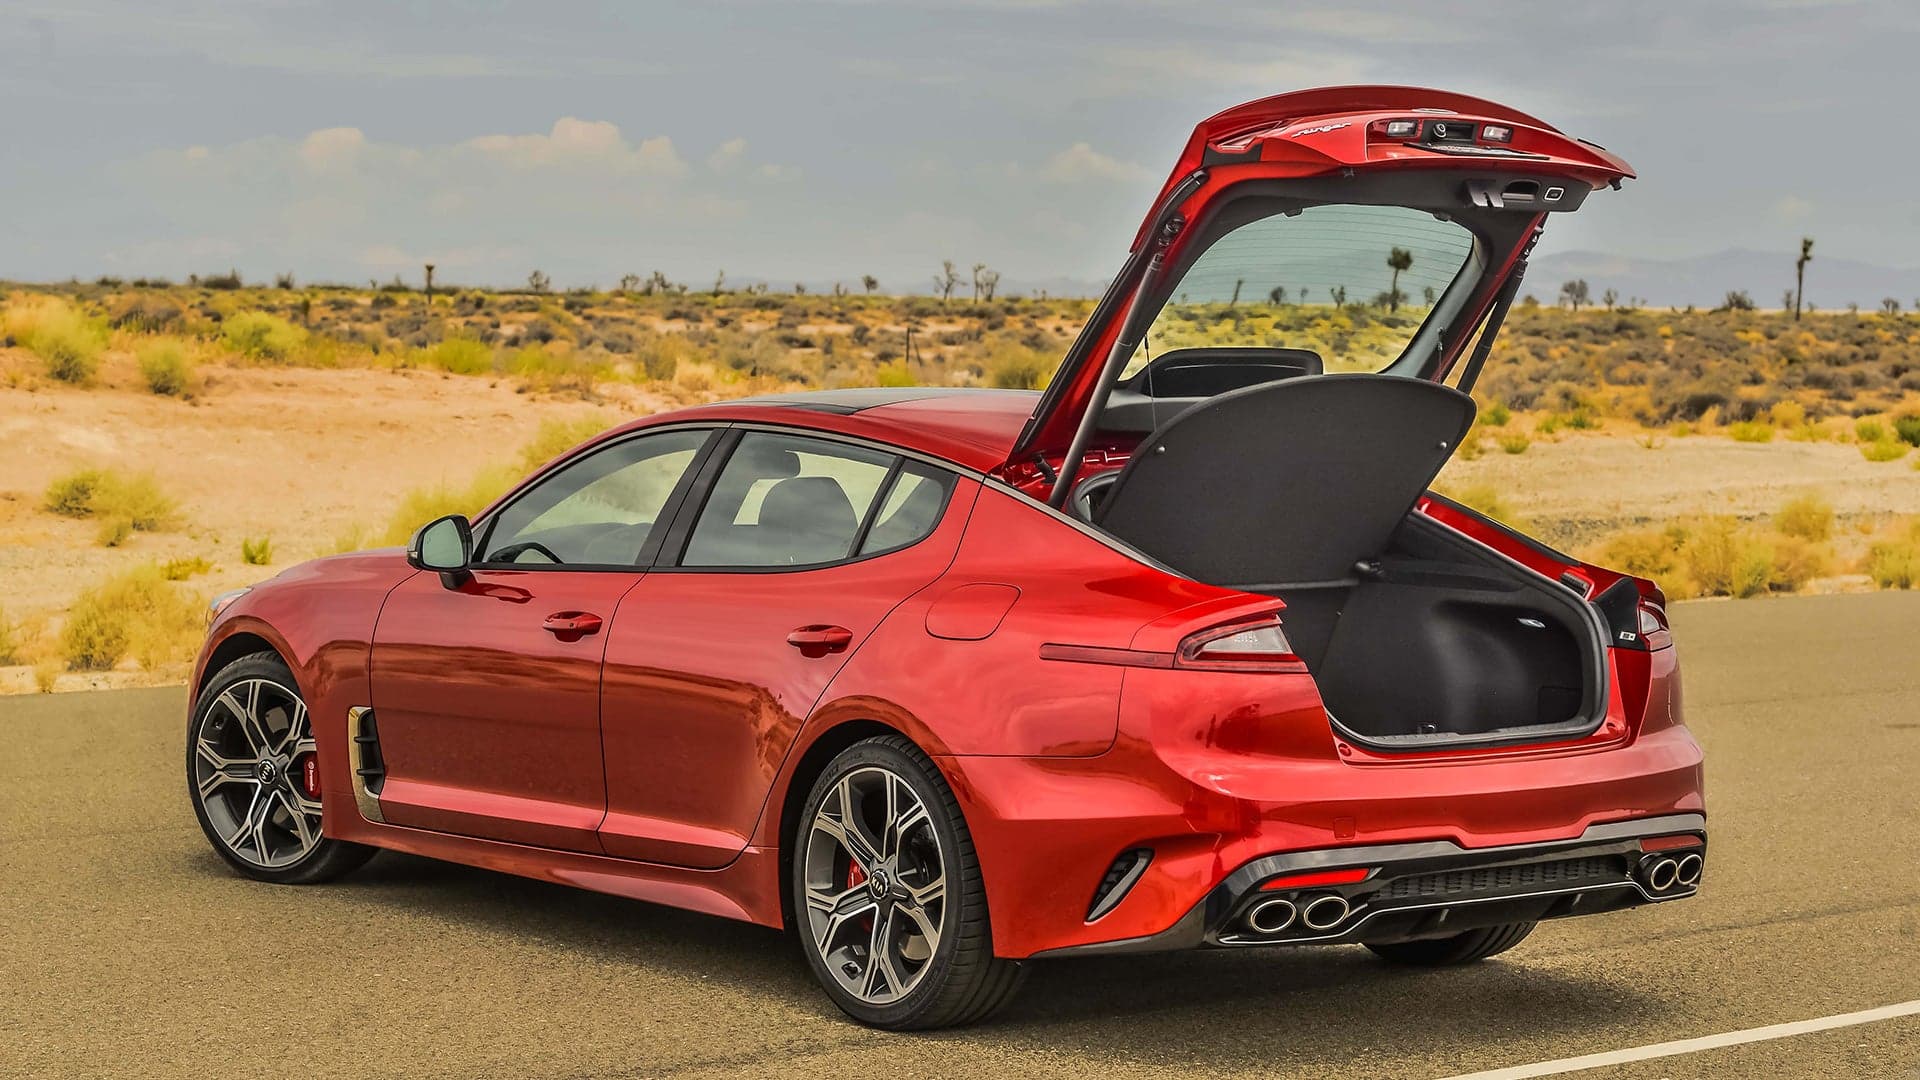 2018 Kia Stinger GT New Dad Review: Wait, This Thing Is a Kia?